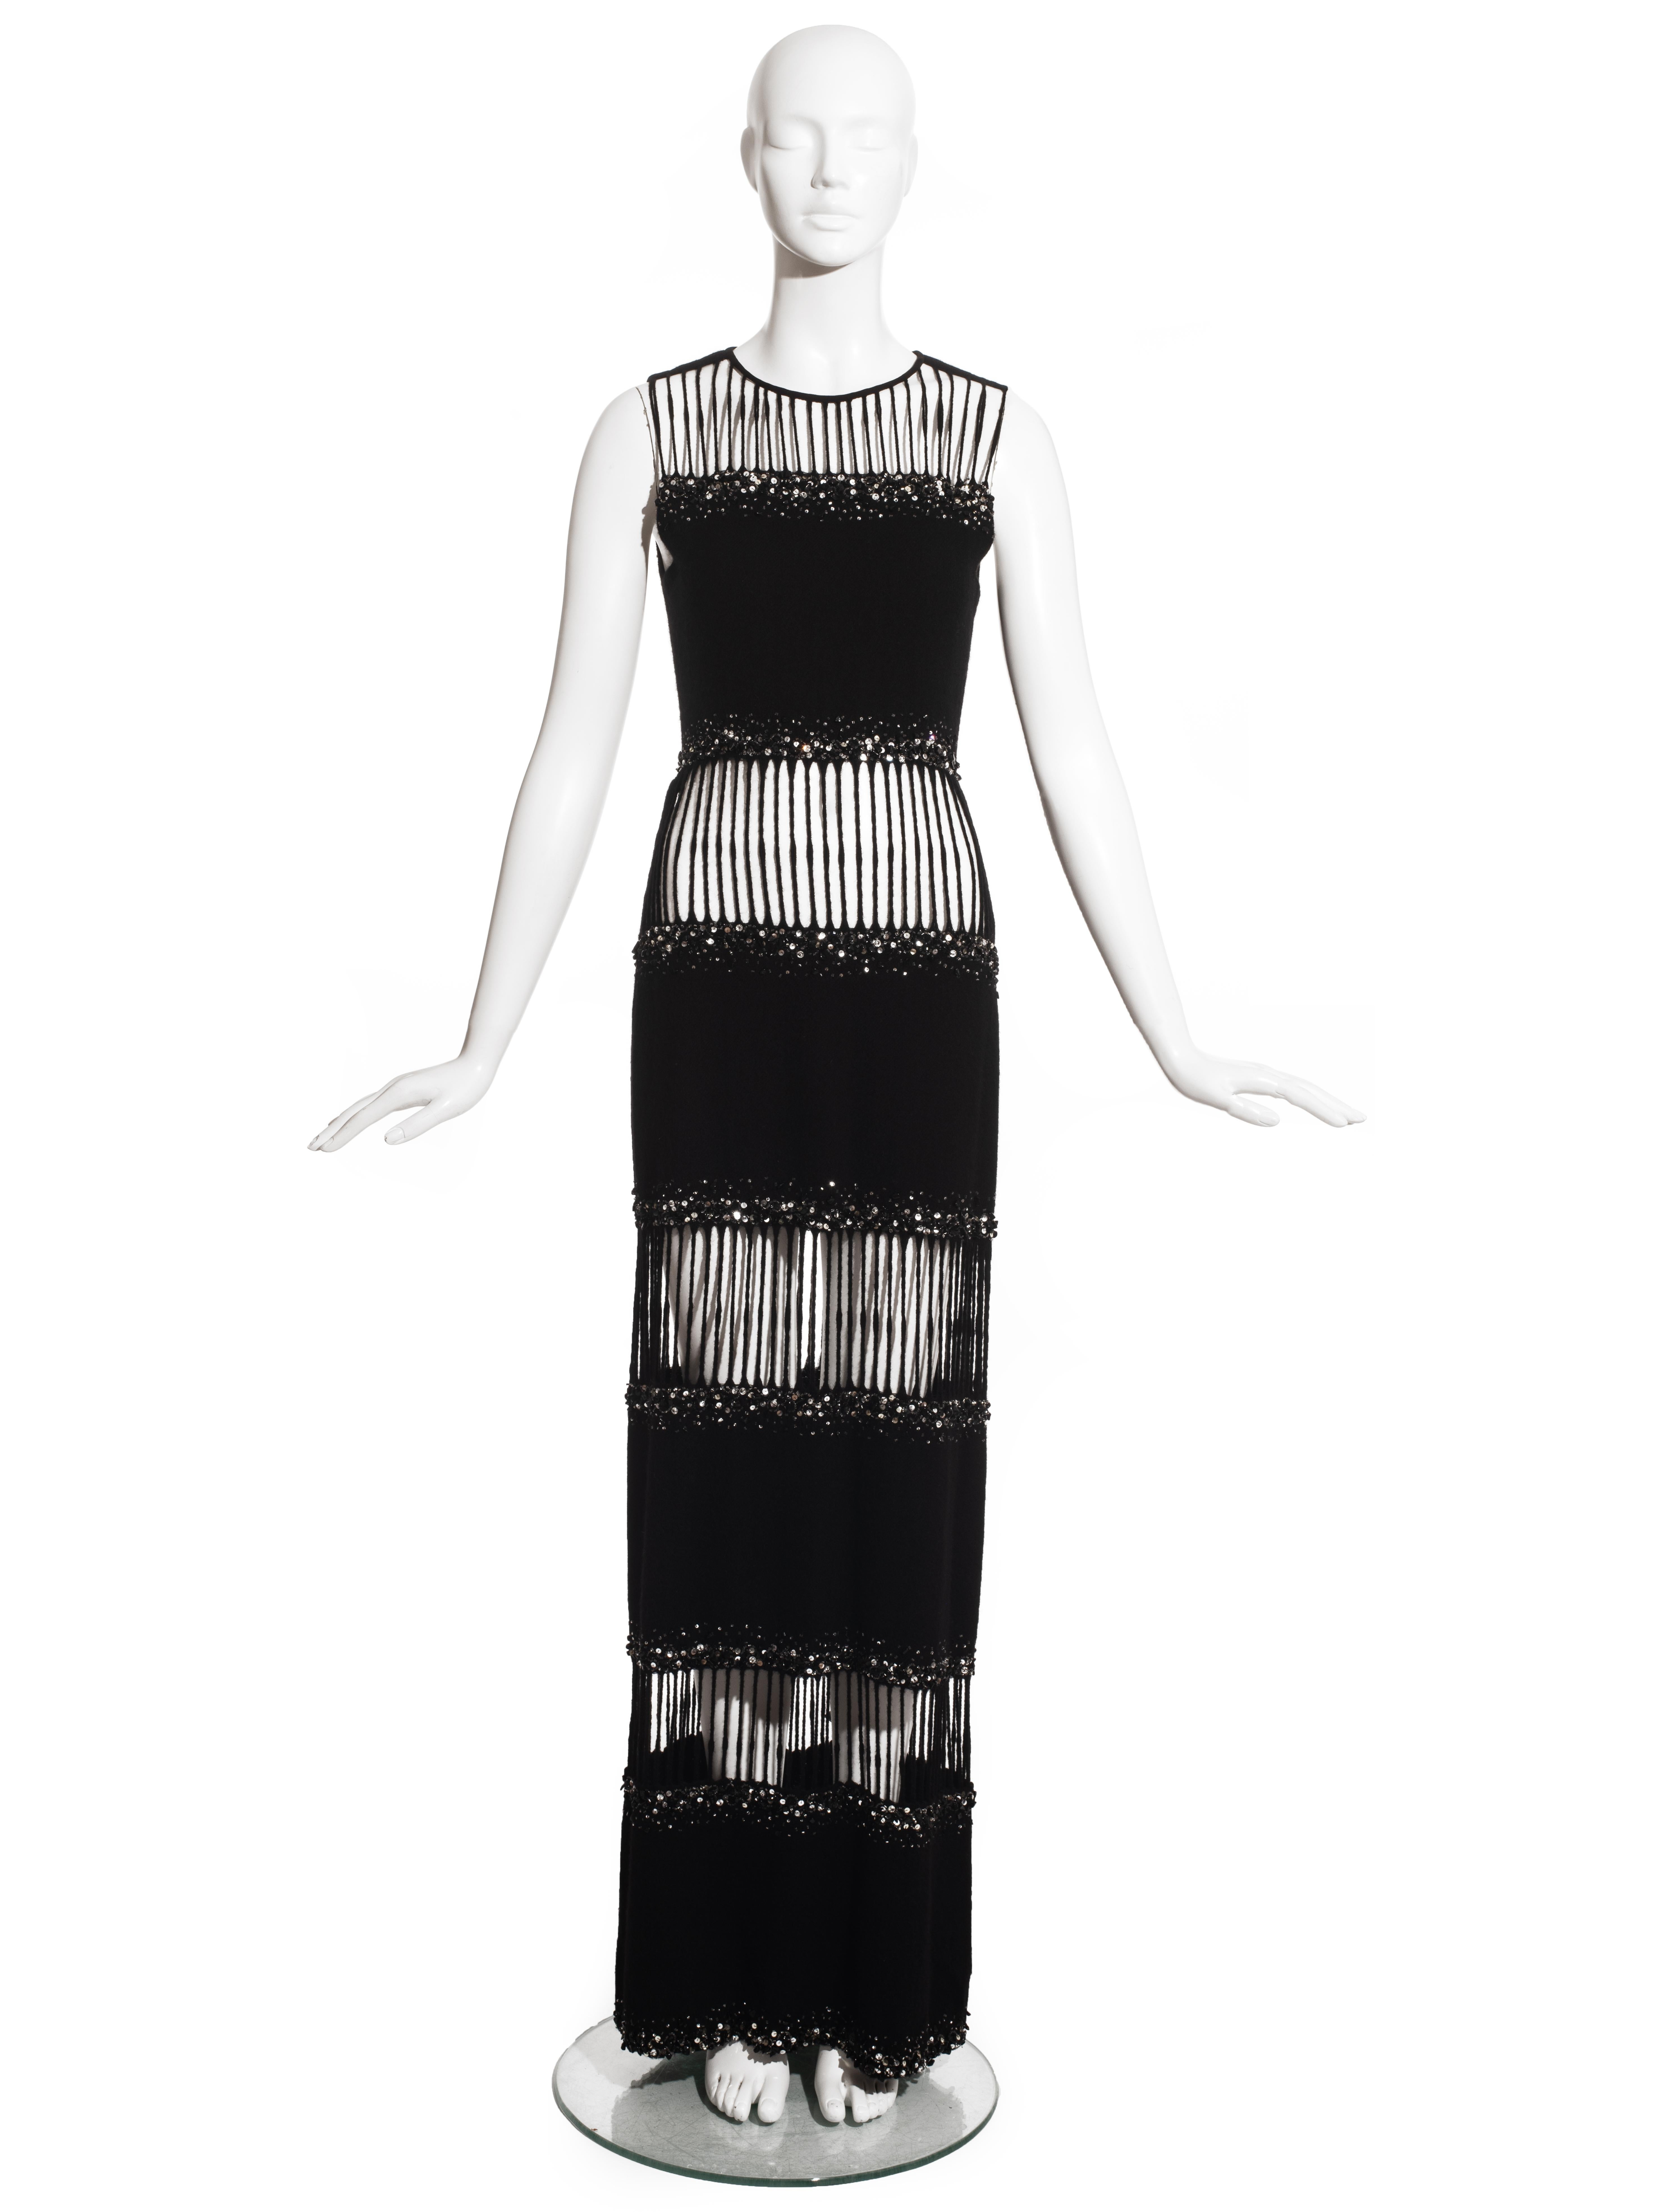 Hardy Amies couture black wool embellished evening dress constructed with four horizontal panels attached with thick wool thread. 

c. 1960